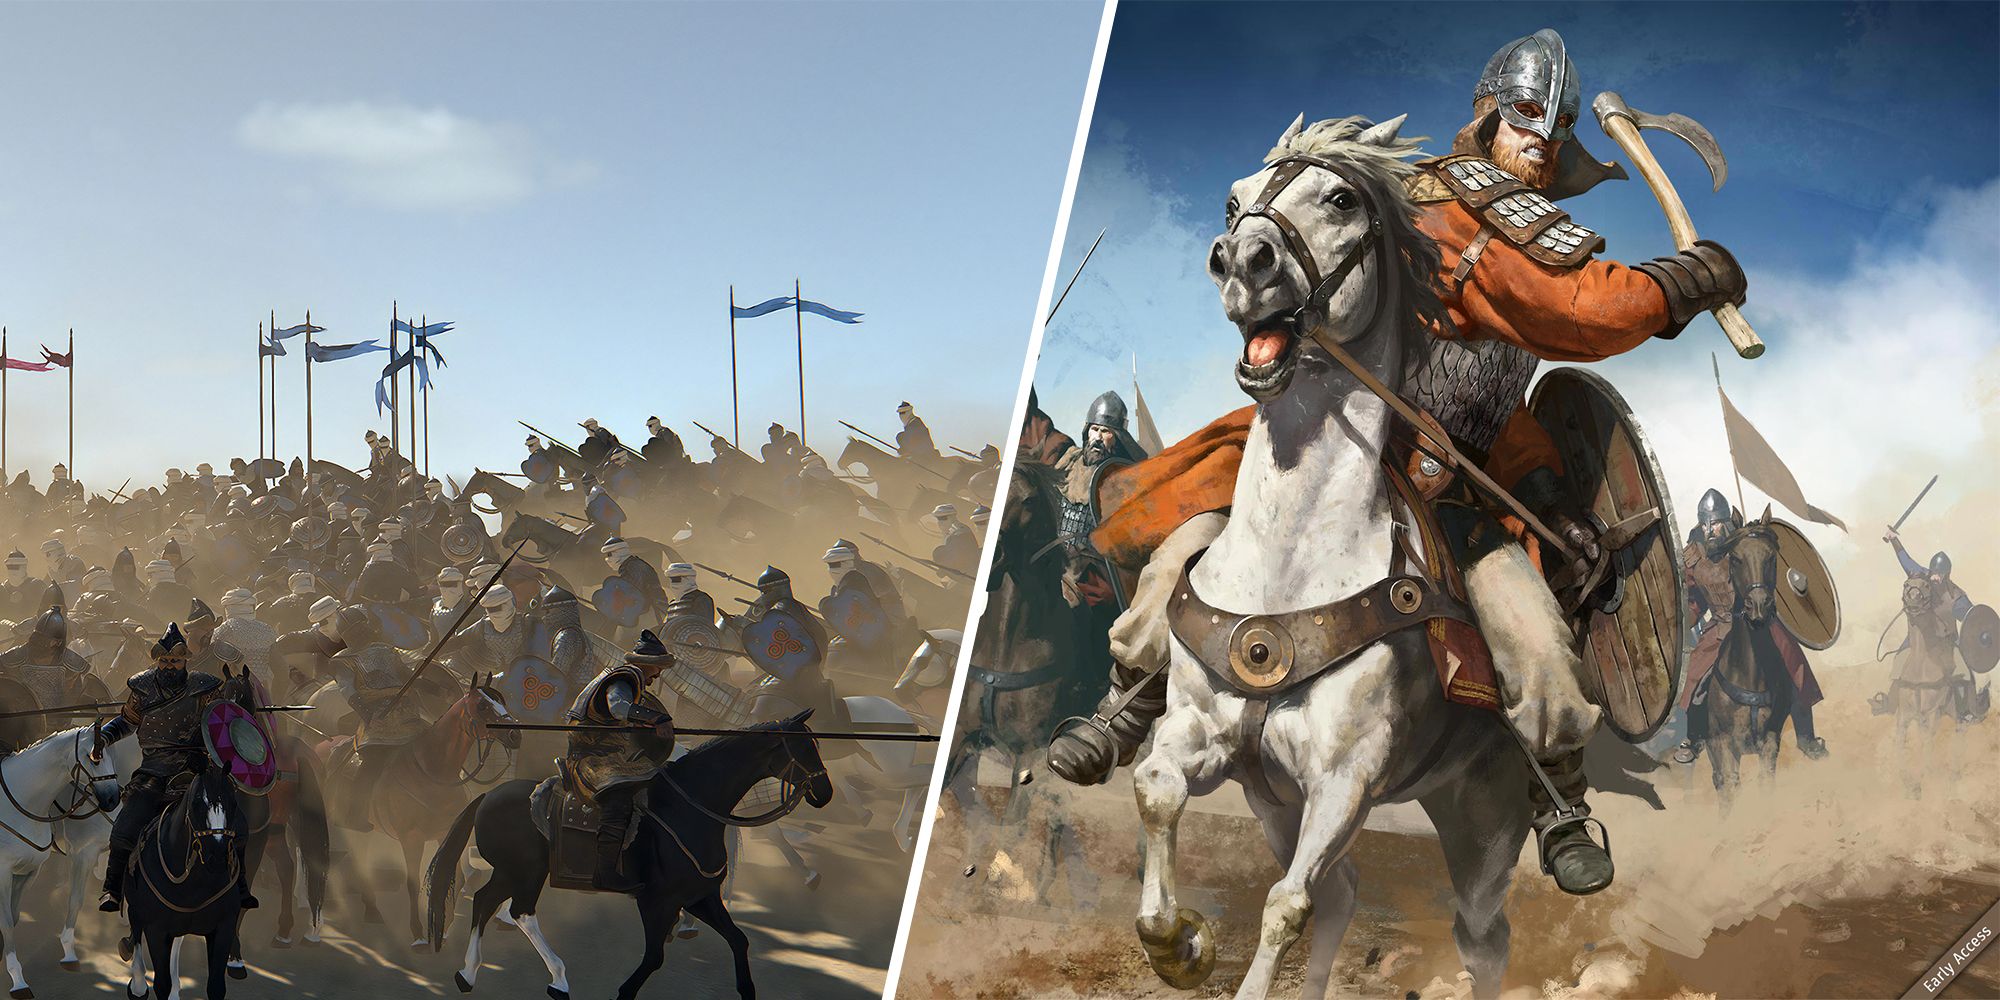 Split image of a horseman in Nordic attire, and large groups of cavalry fighting in the desert